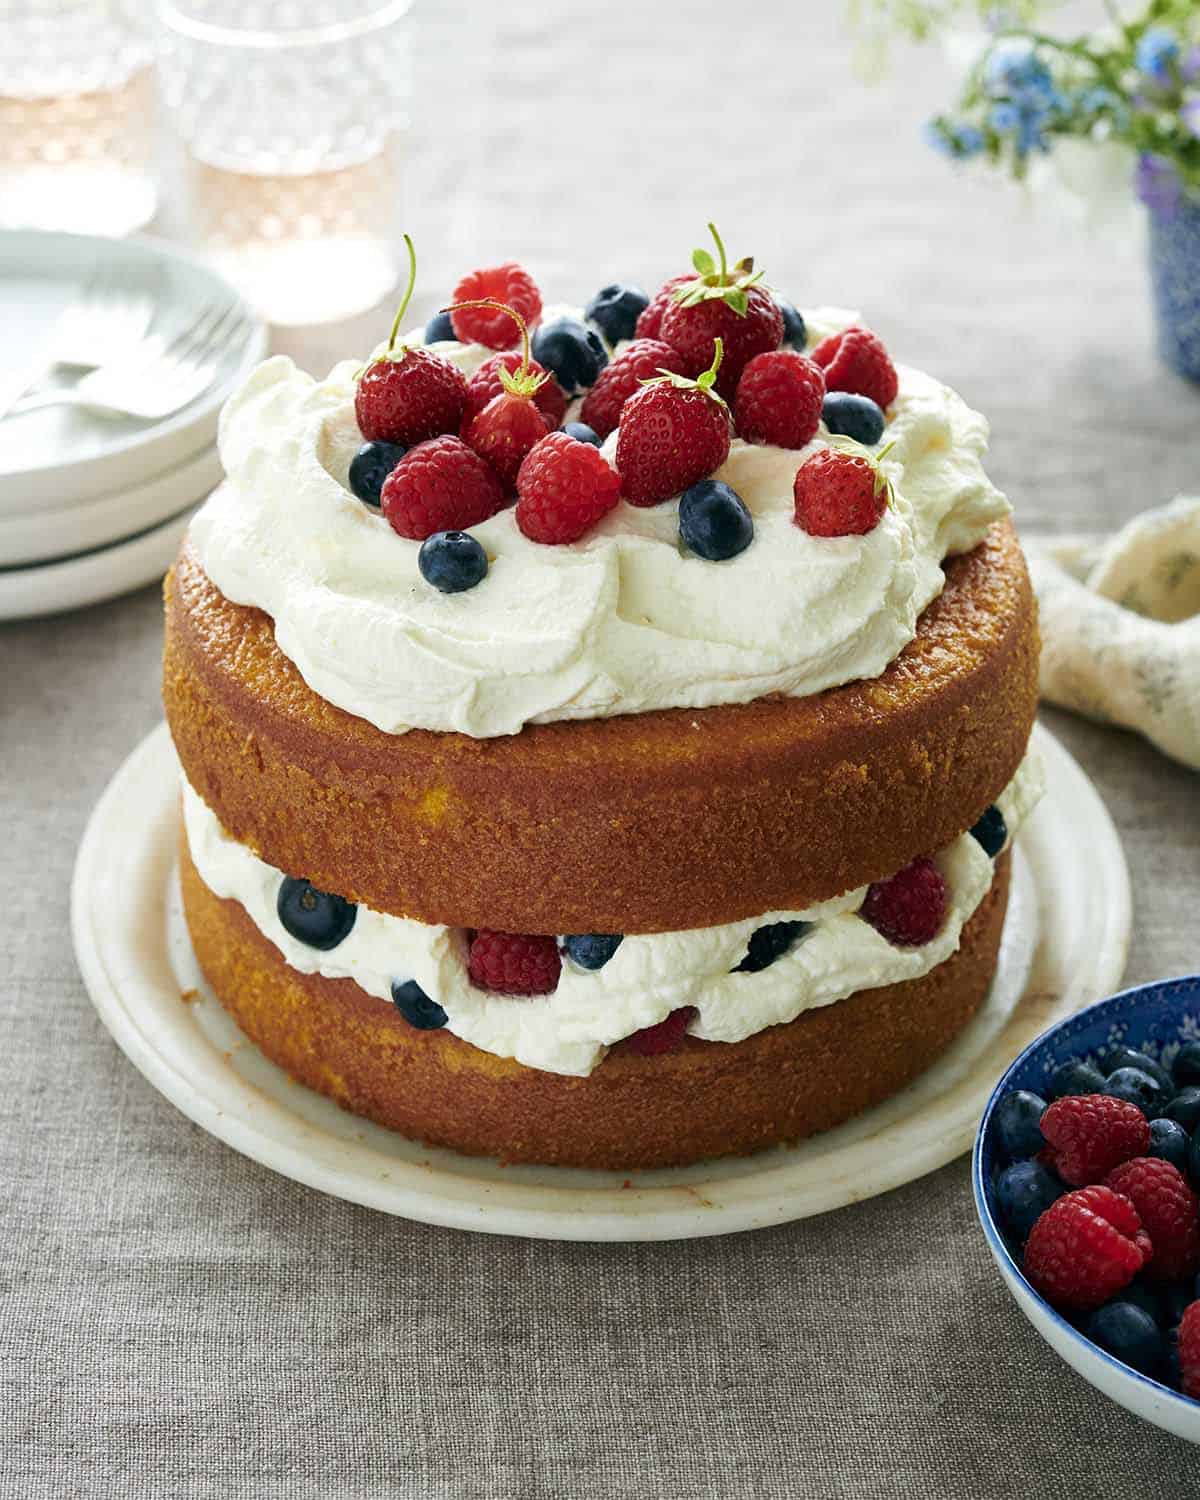 A a photo of a two layer olive oil cake with whipped cream and berries on a table.